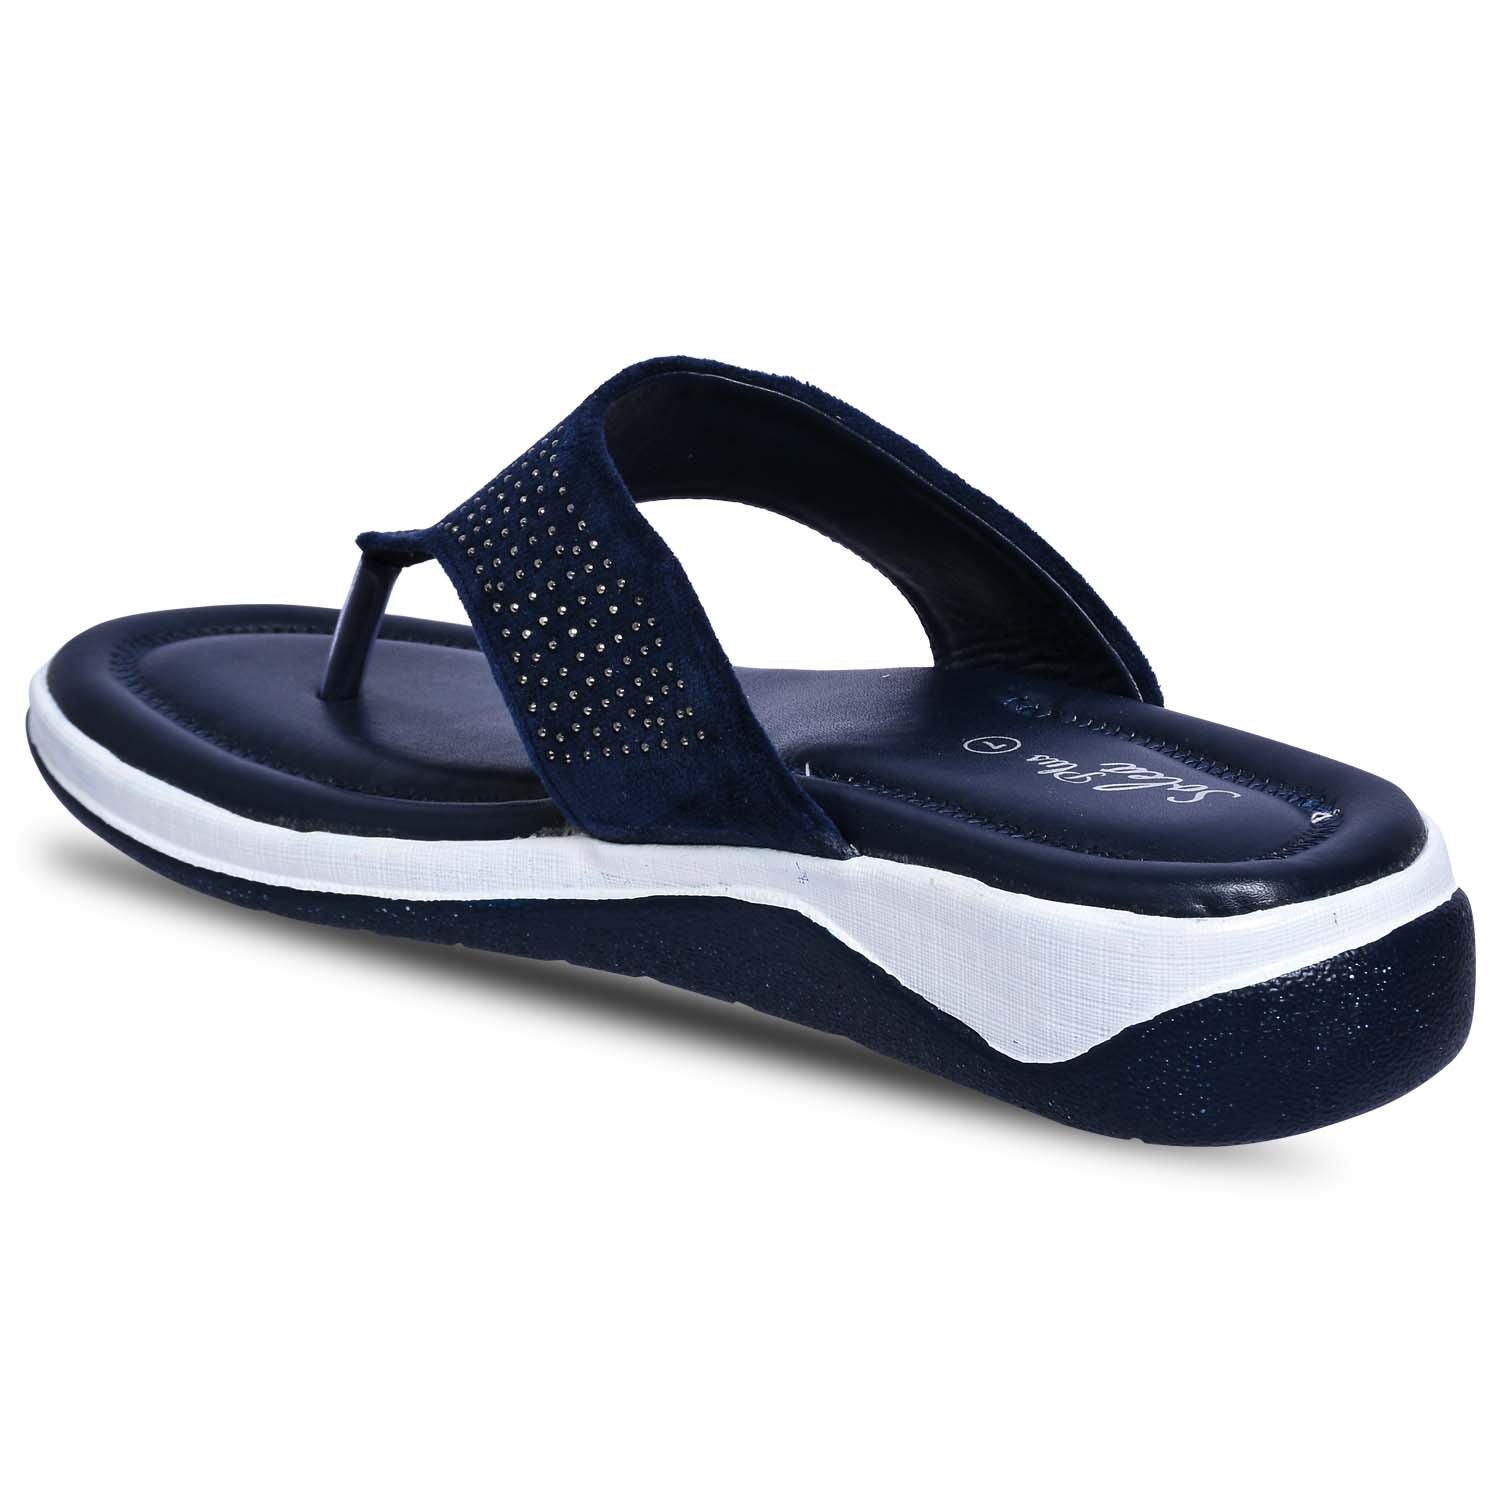 Paragon R1026L Women Sandals | Casual &amp; Formal Sandals | Stylish, Comfortable &amp; Durable | For Daily &amp; Occasion Wear